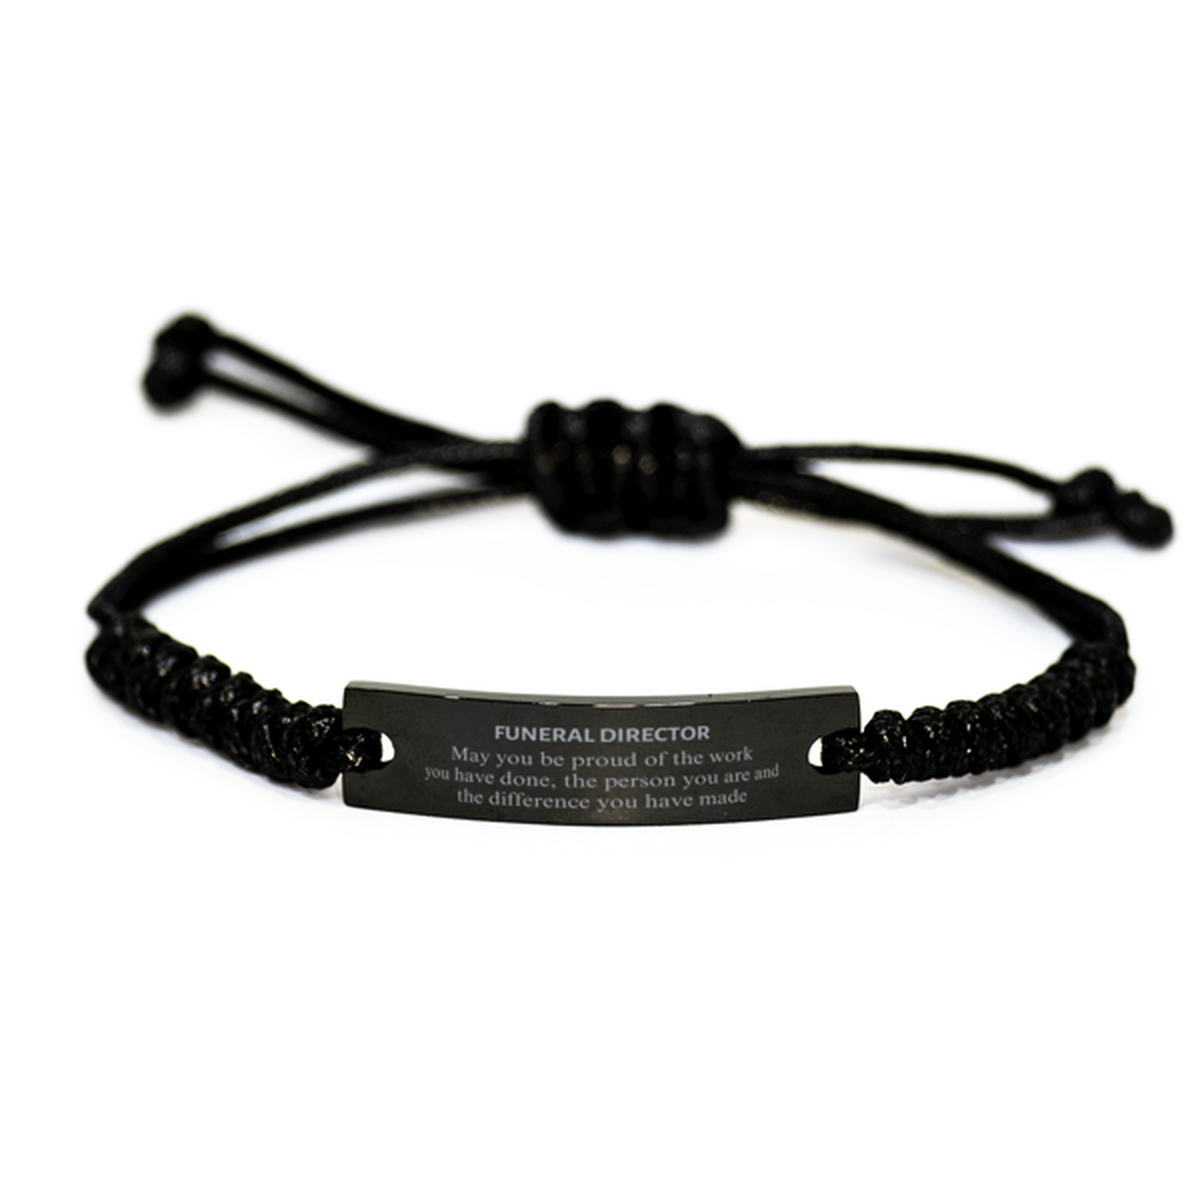 Funeral Director May you be proud of the work you have done, Retirement Funeral Director Black Rope Bracelet for Colleague Appreciation Gifts Amazing for Funeral Director